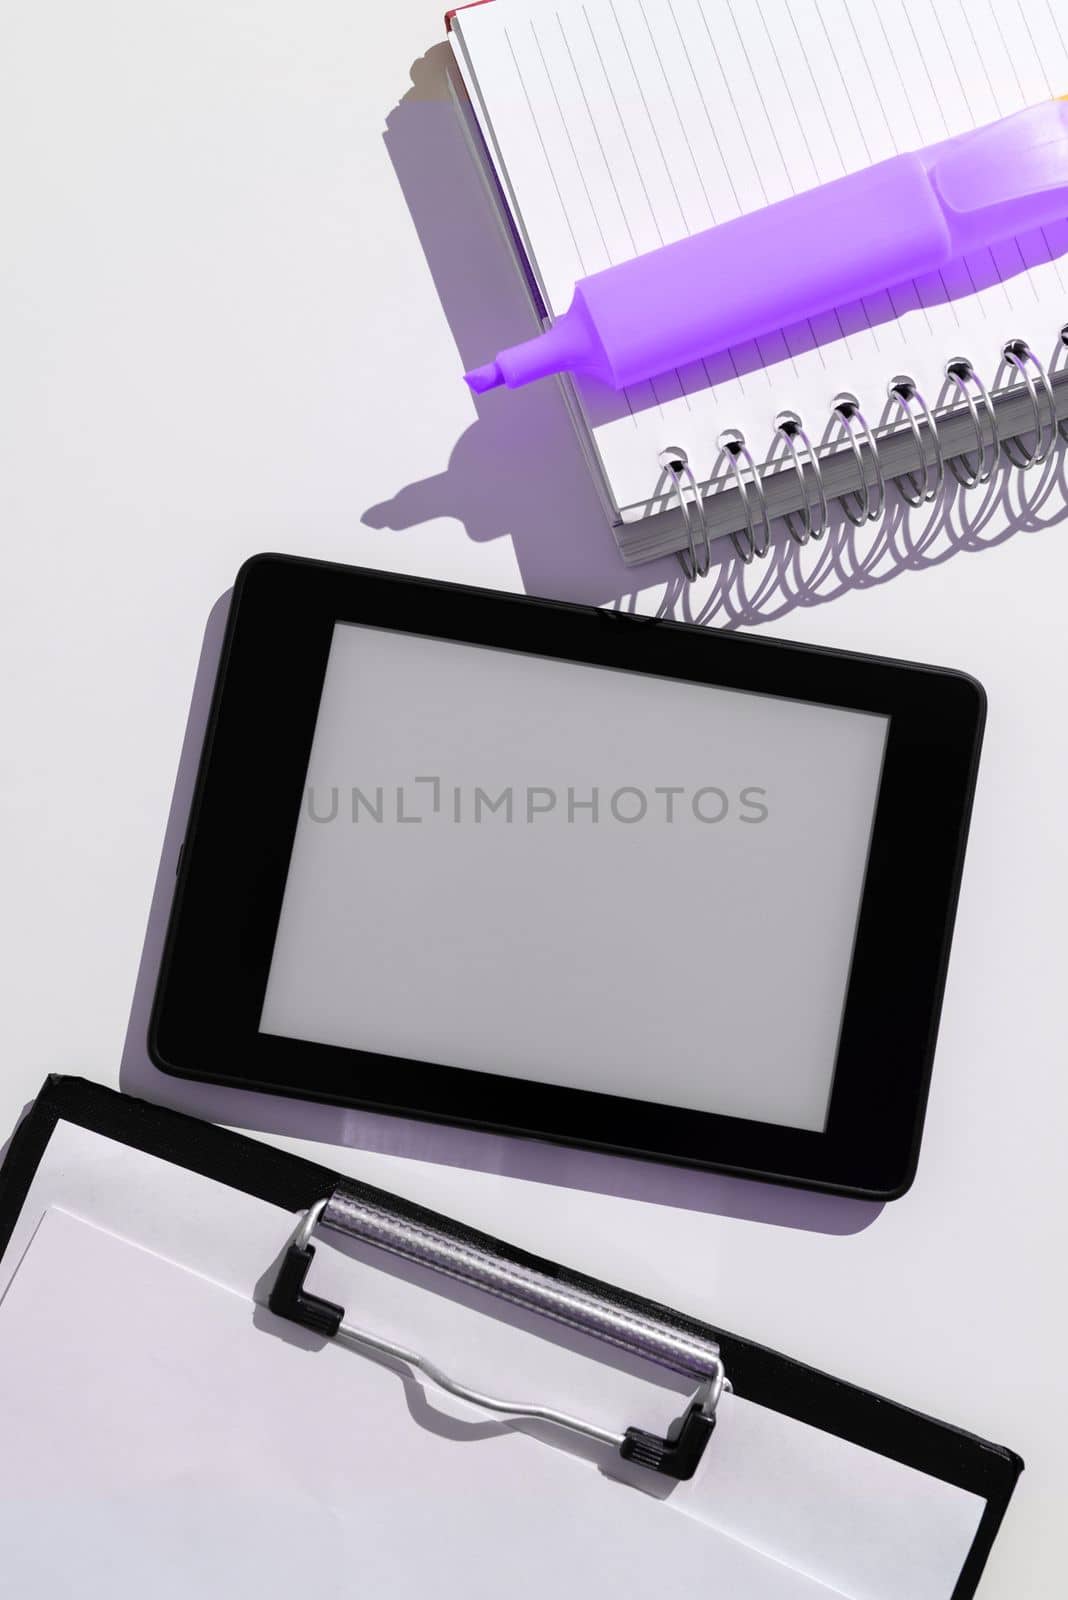 Tablet Screen With Important Ideas On It And Note Sticked On Desk